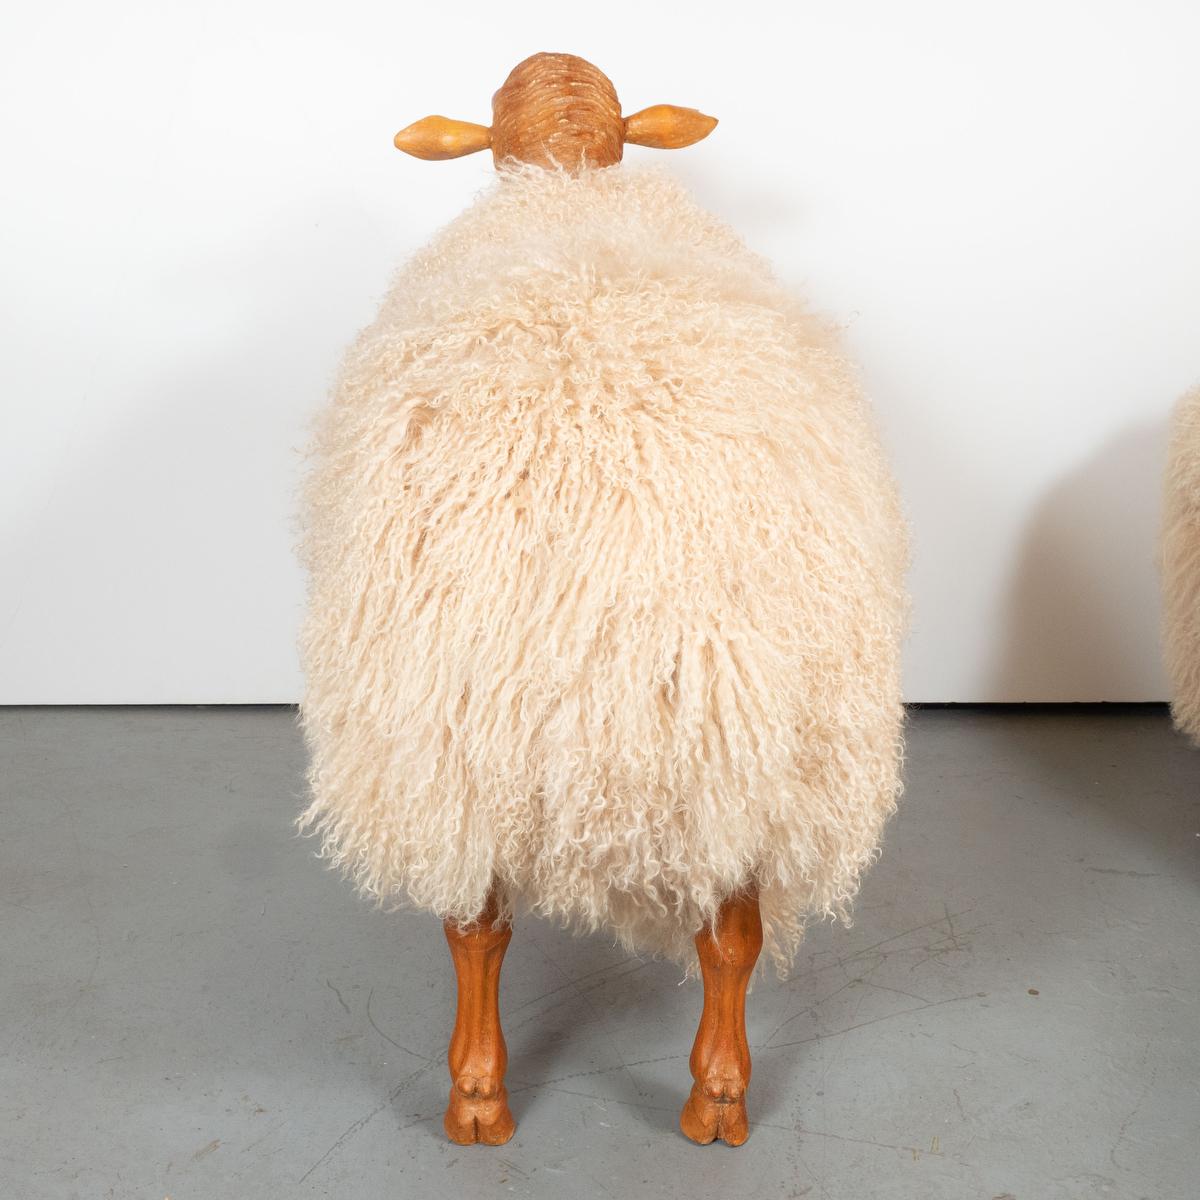 American Large Sheep Sculpture by Carlos Villegas For Sale